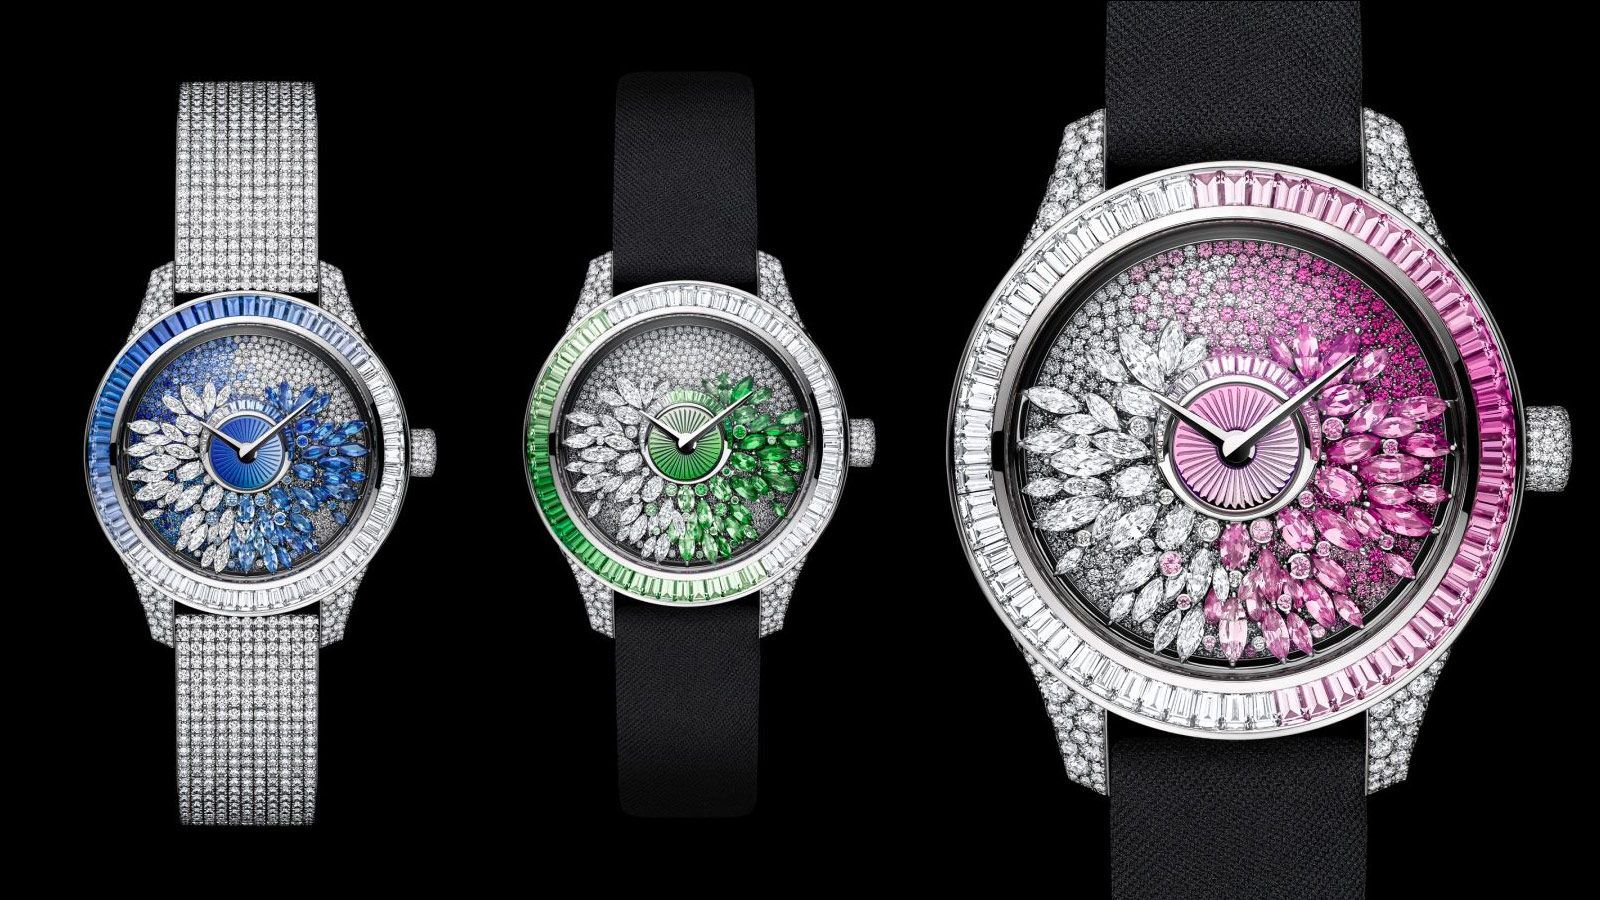 The Dior Grand Bal Tie & Dye comes in three colourways - blue sapphire, pink sapphire and green tsavorite